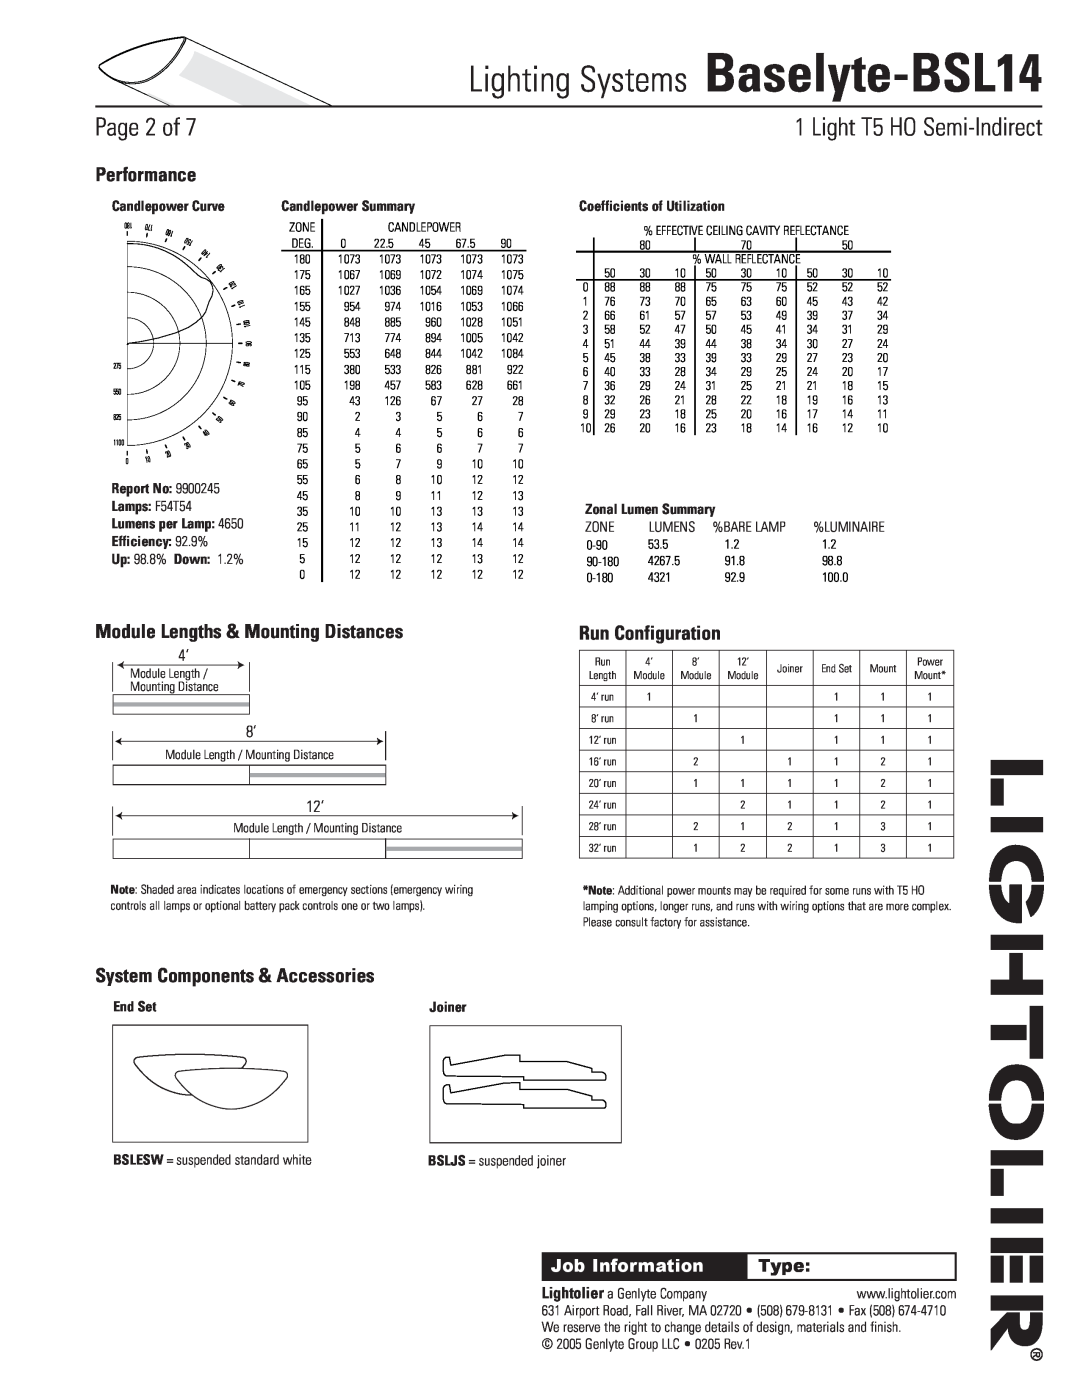 Lightolier Lighting Systems Baselyte-BSL14, Page of, Light T5 HO Semi-Indirect, Performance, Run Configuration, Type 